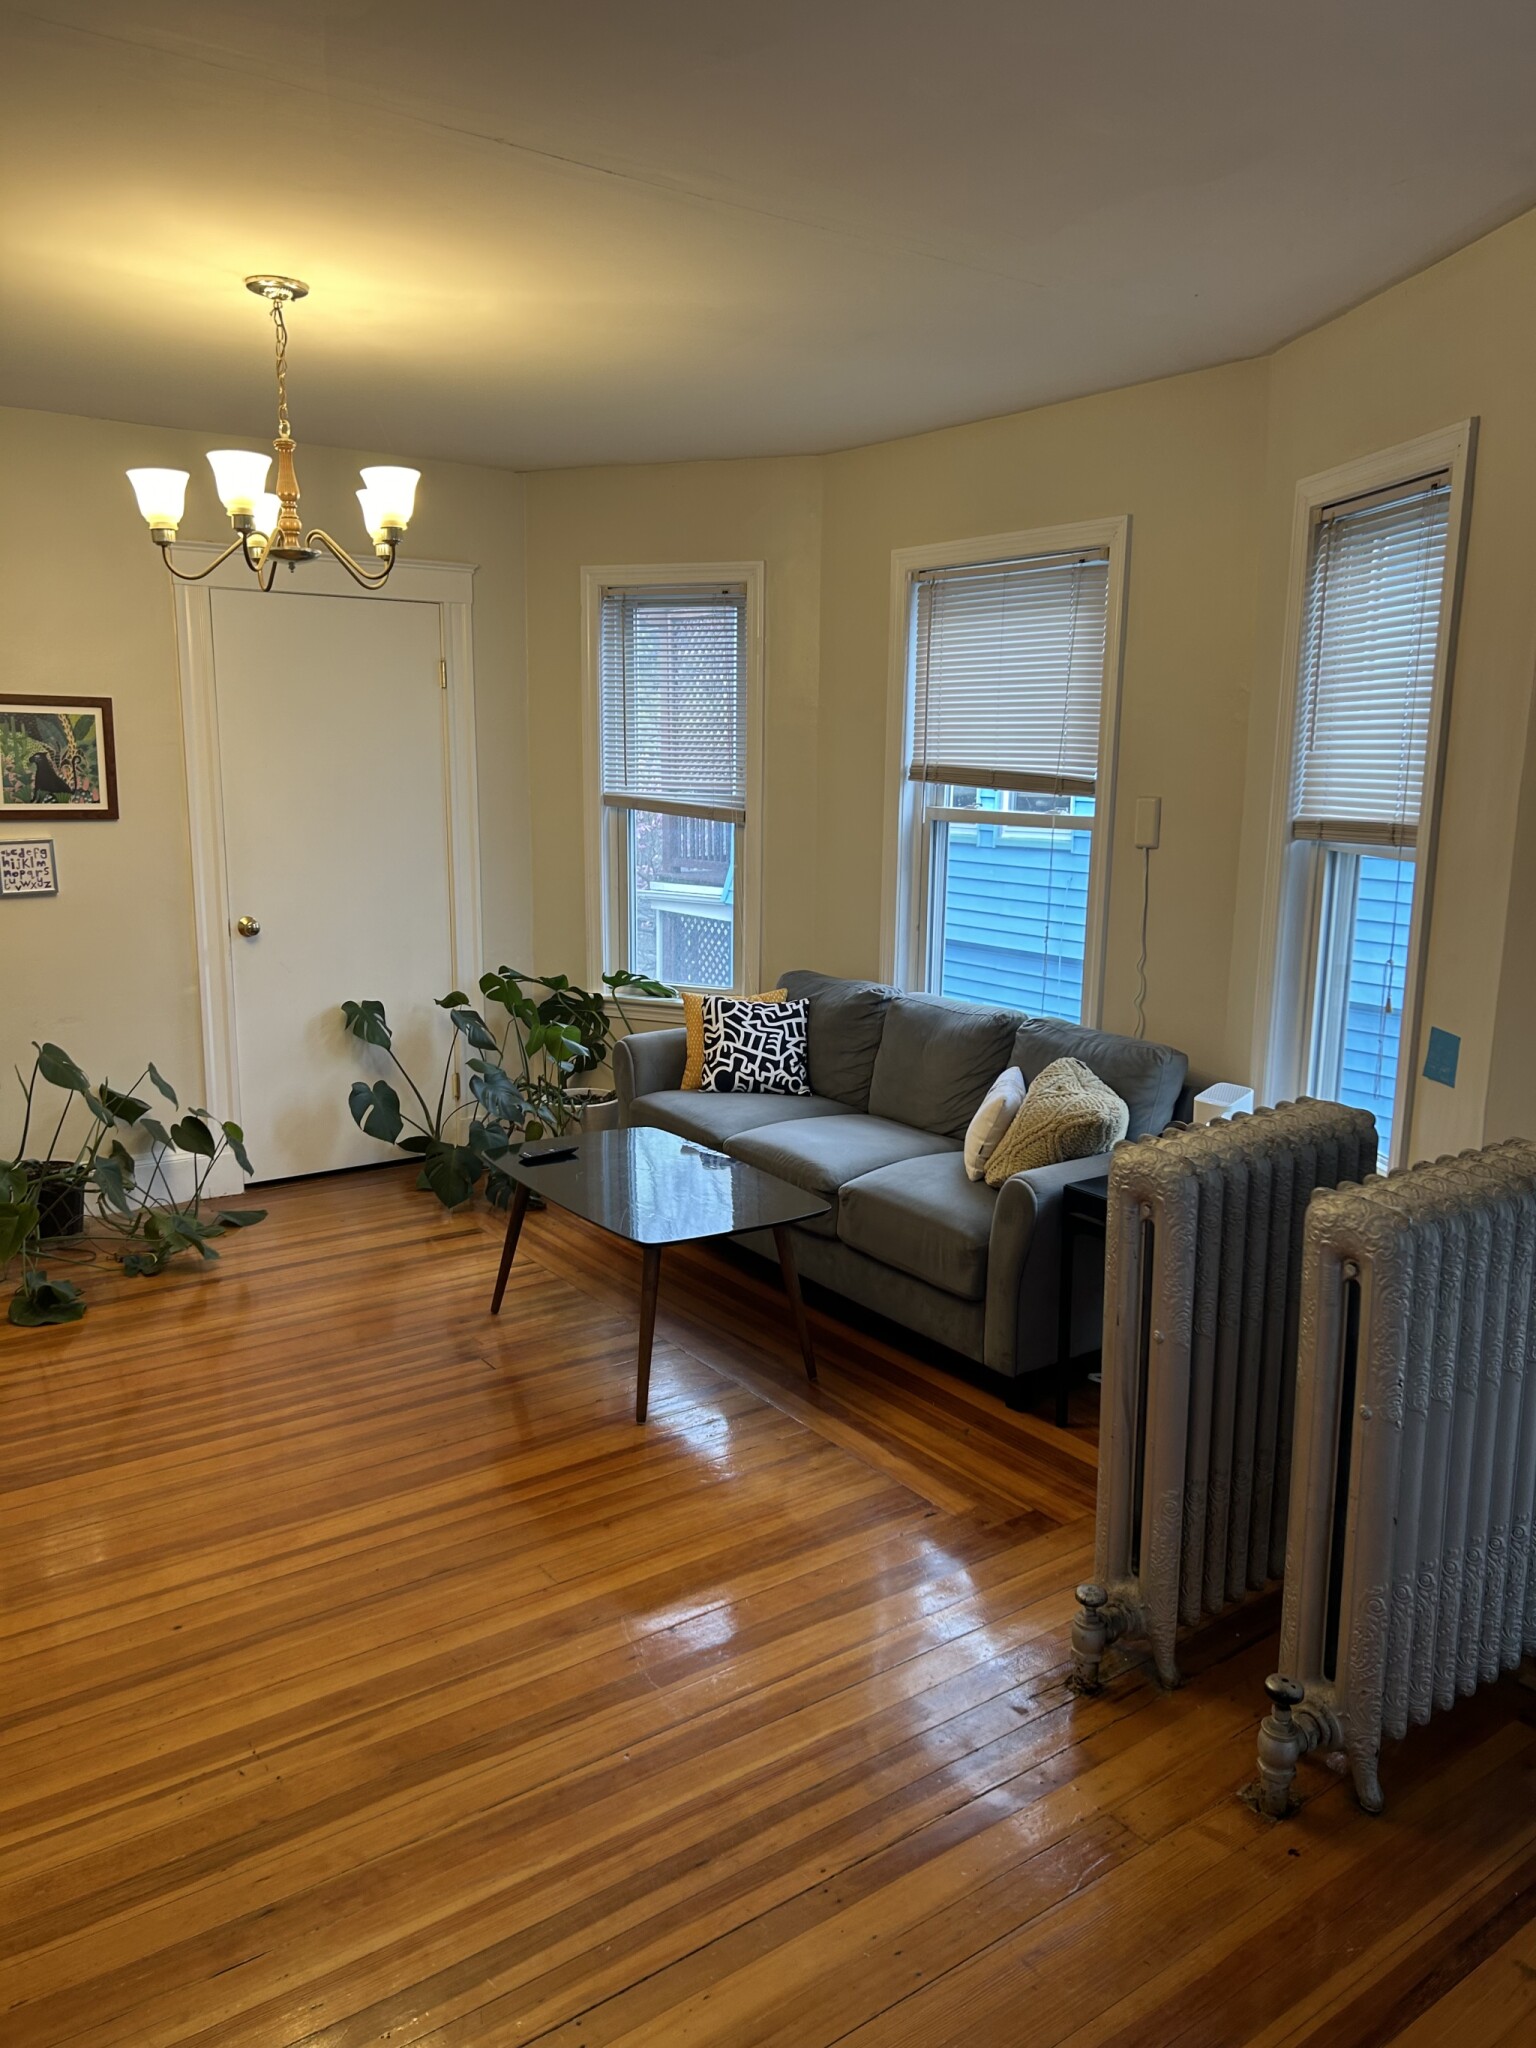 Photos of apartment on Dow St.,Somerville MA 02144